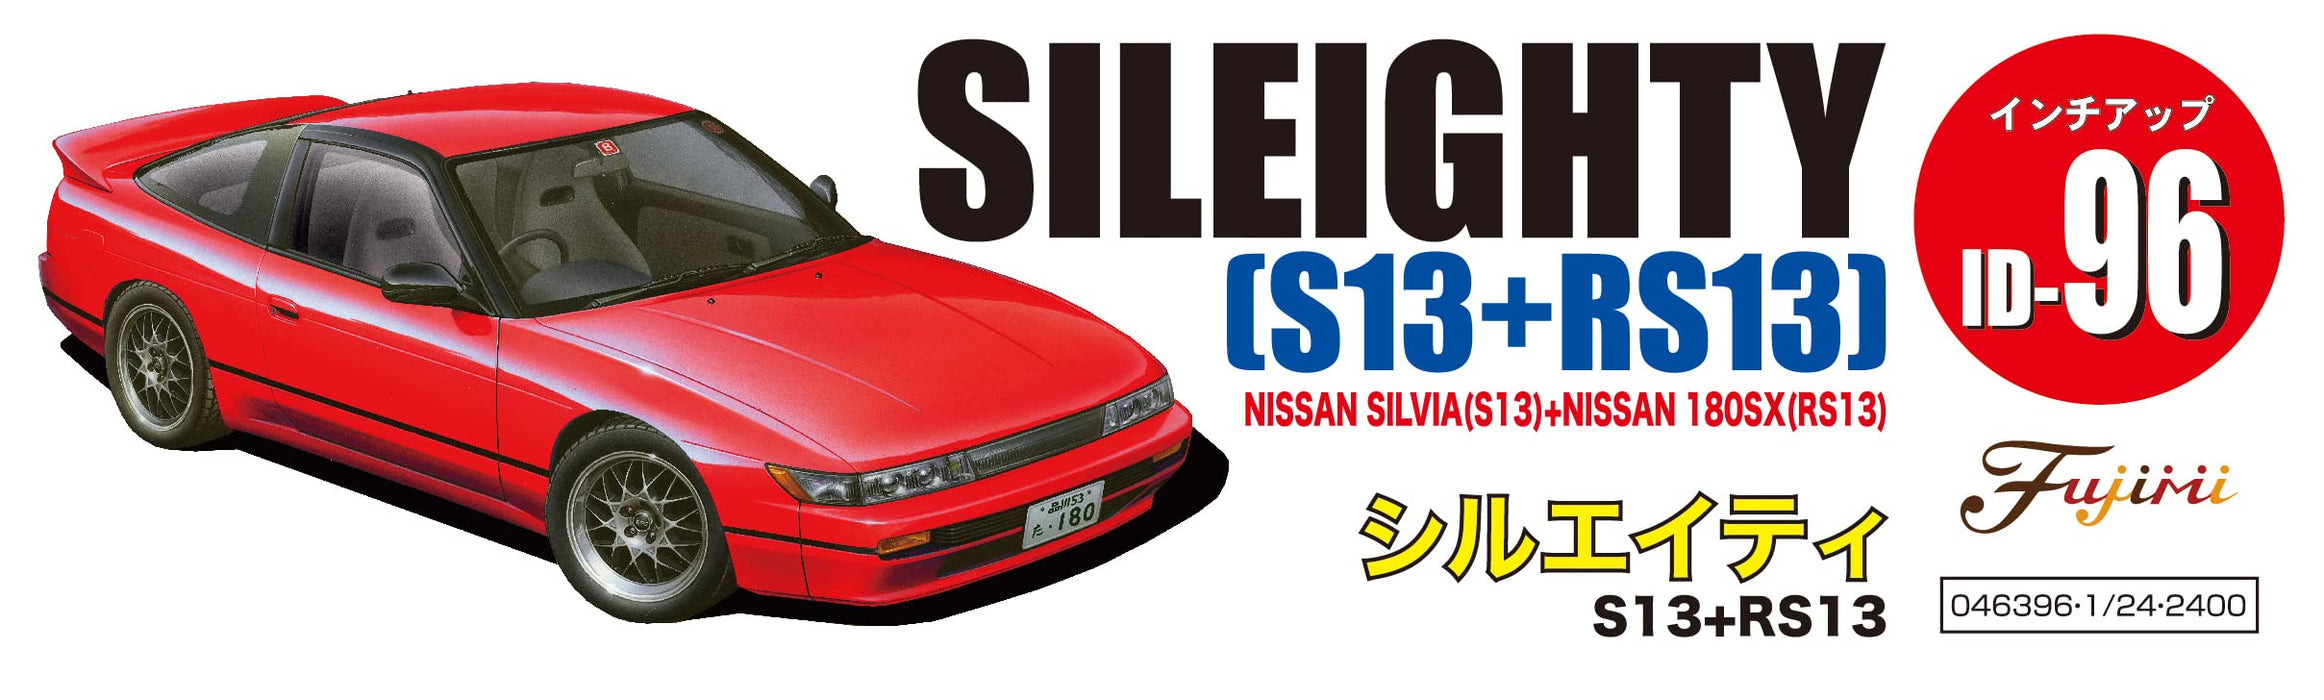 FUJIMI Inch Up 1/24 No.96 New Sileighty S13 + Rs13 Plastic Model